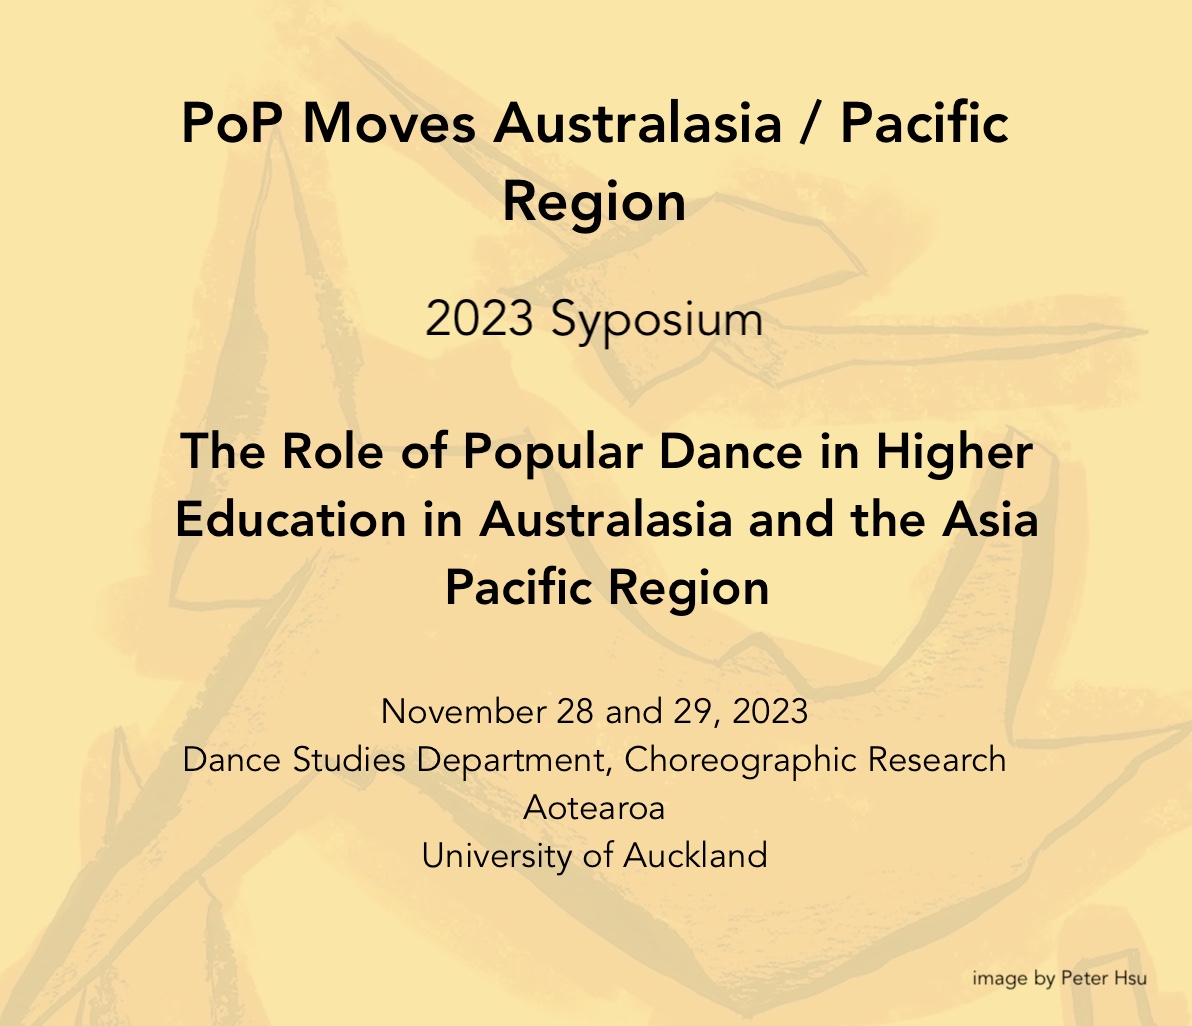 'The Role of Popular Dance in Higher Education in Australasia and the Asia Pacific Region' banner